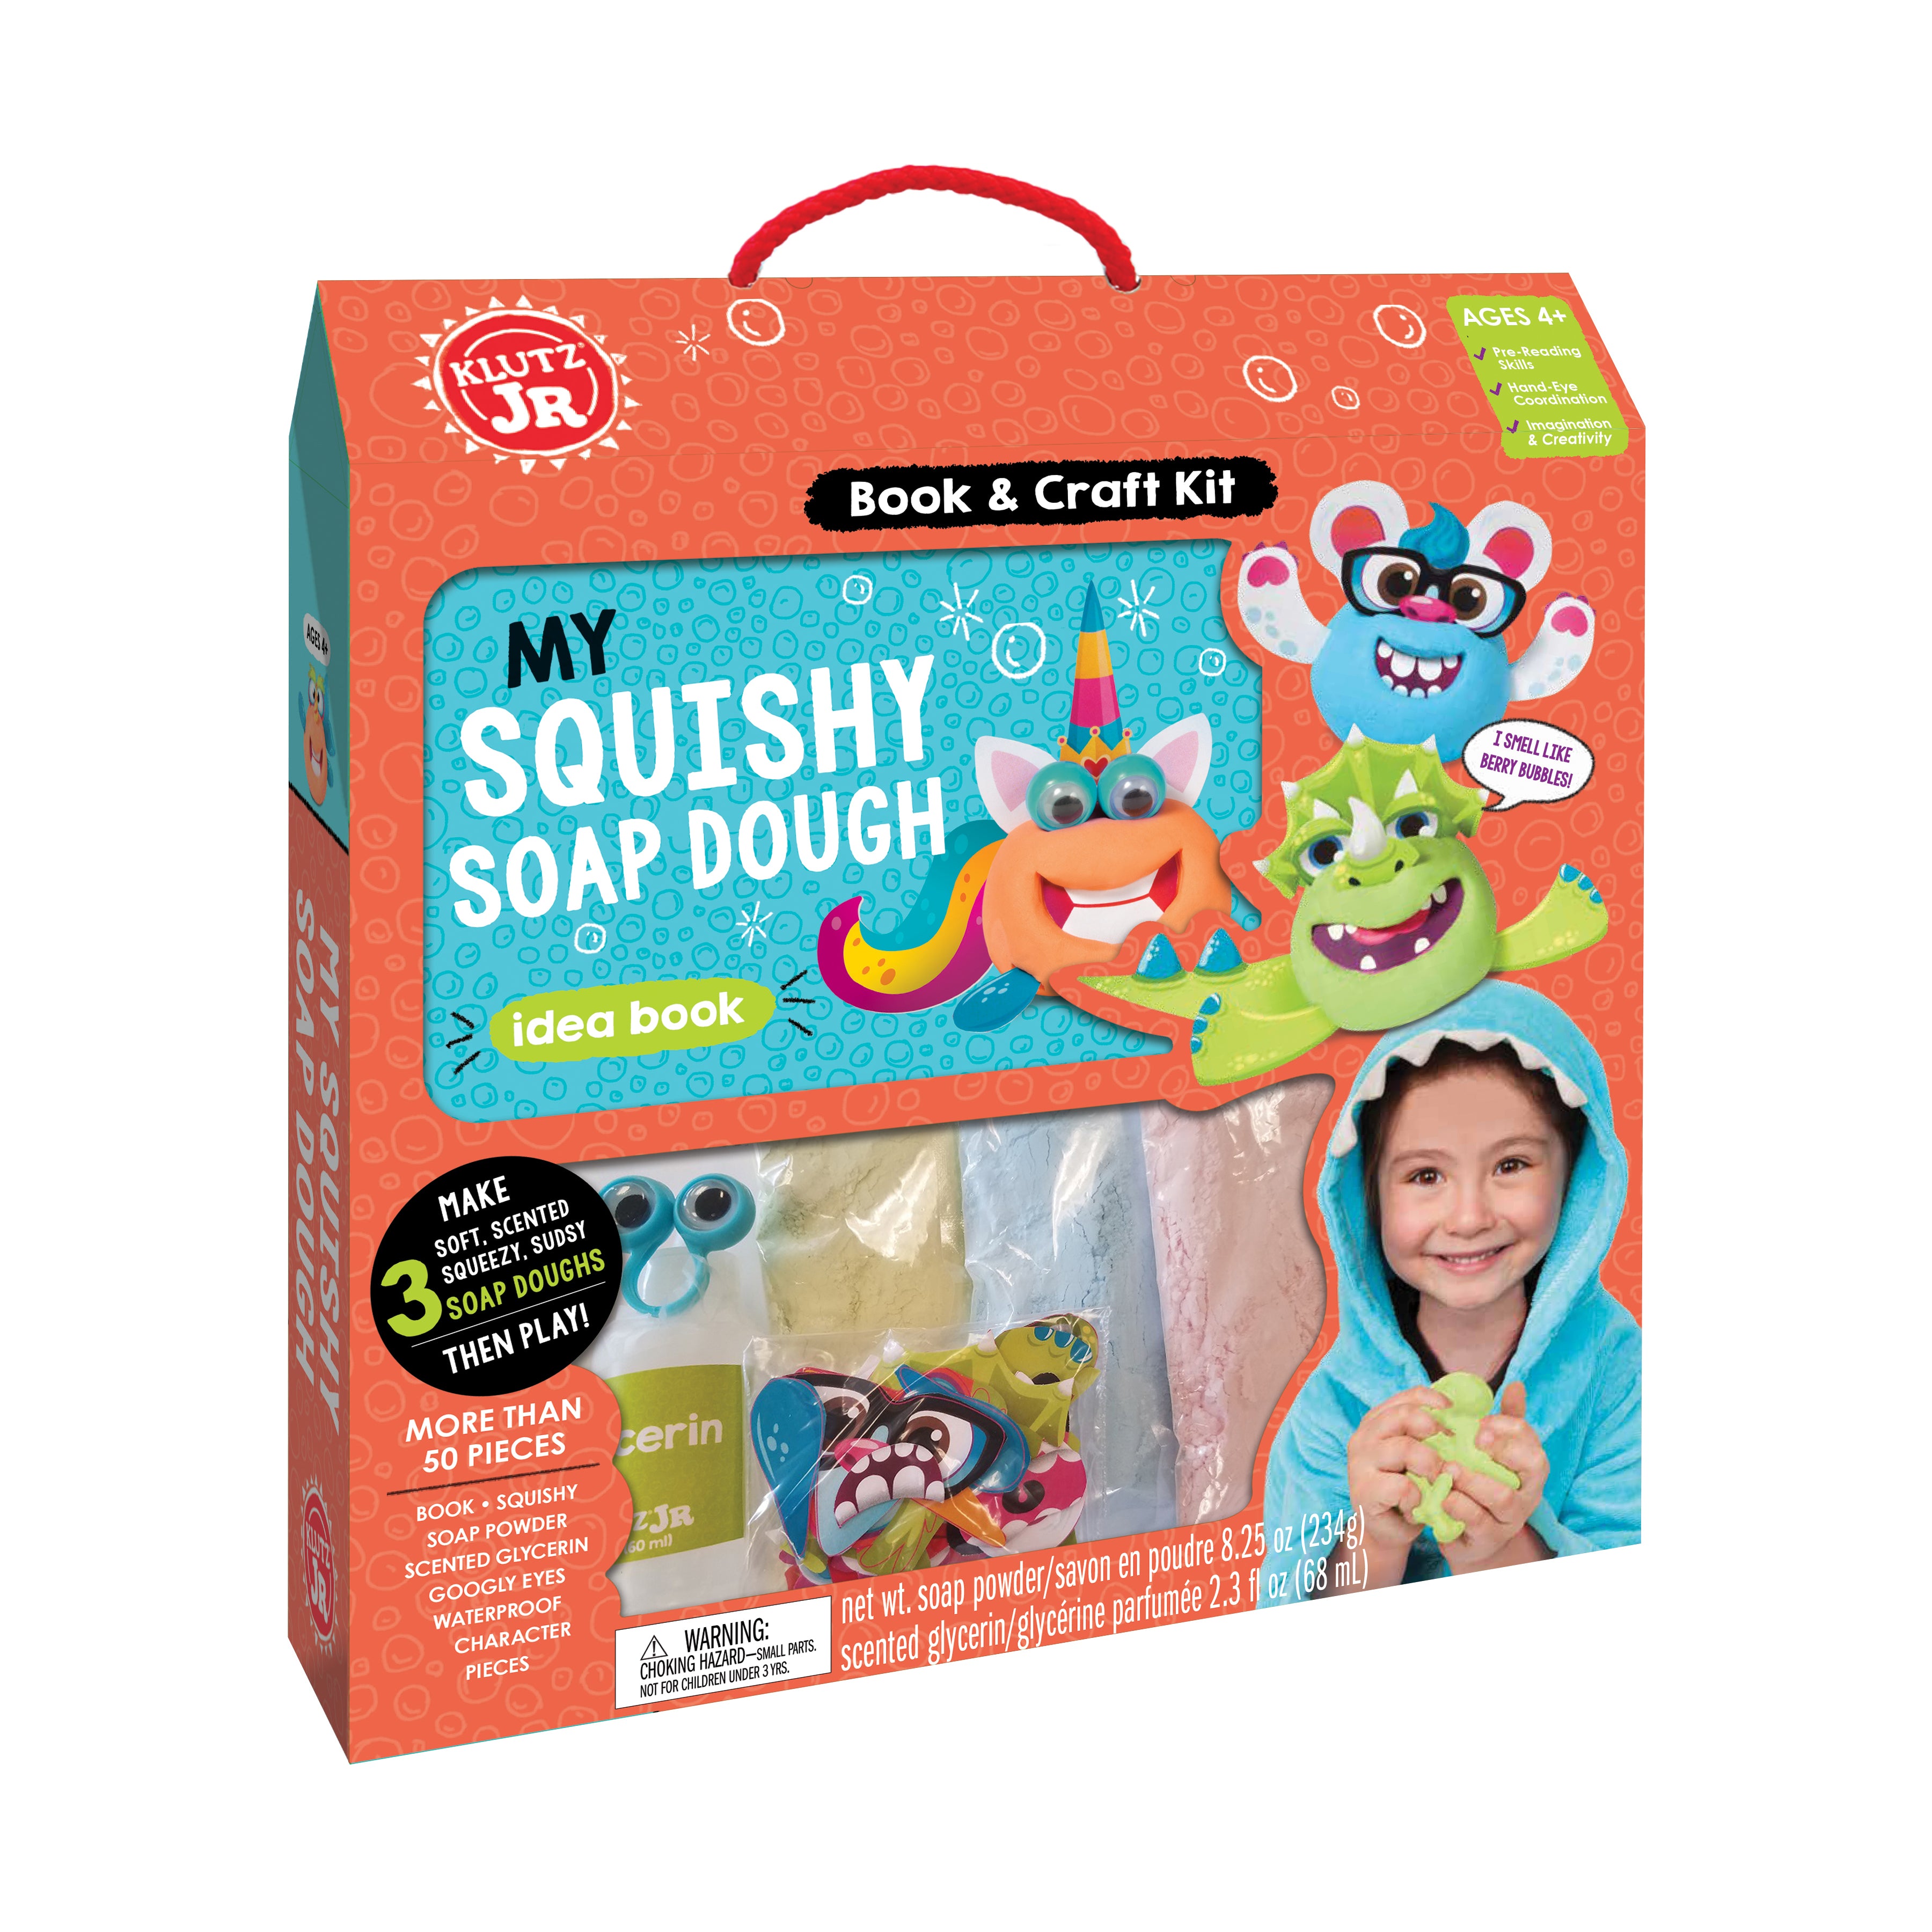 Soaps & Scents Creative Lab Kit by SentoSphere USA